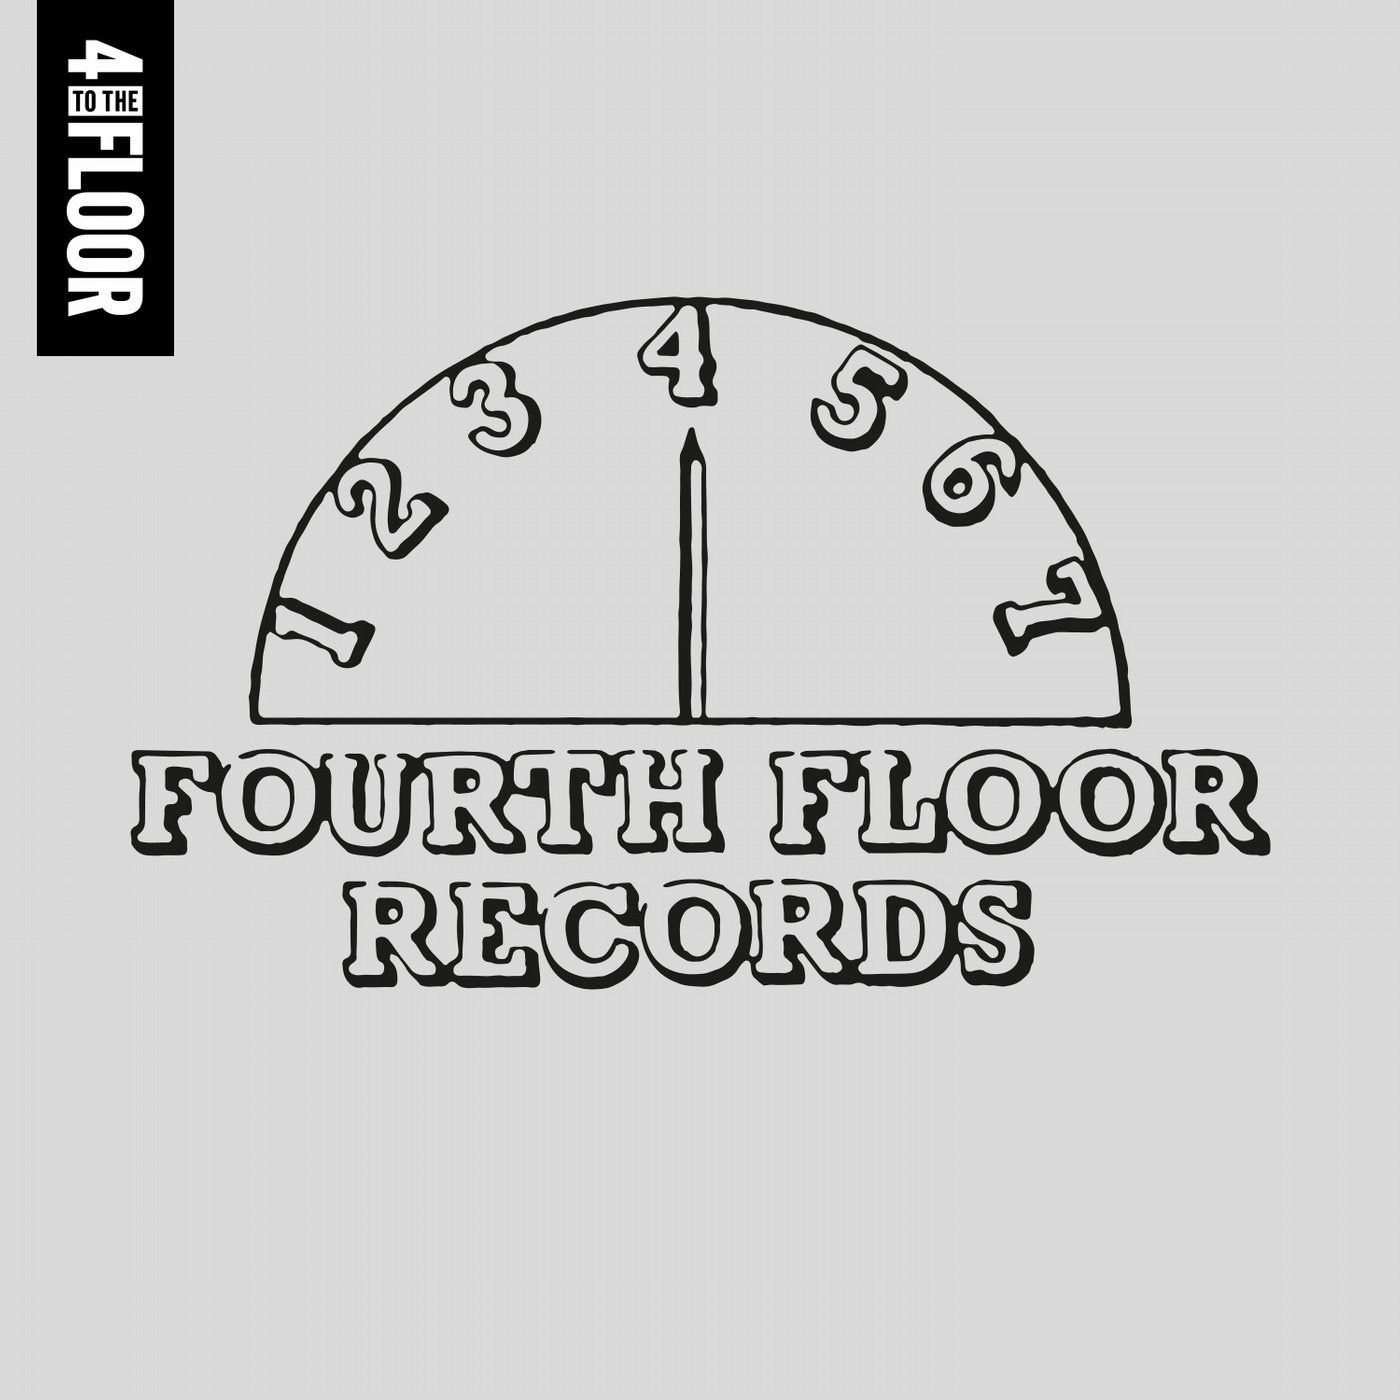 4 To The Floor presents Fourth Floor Records